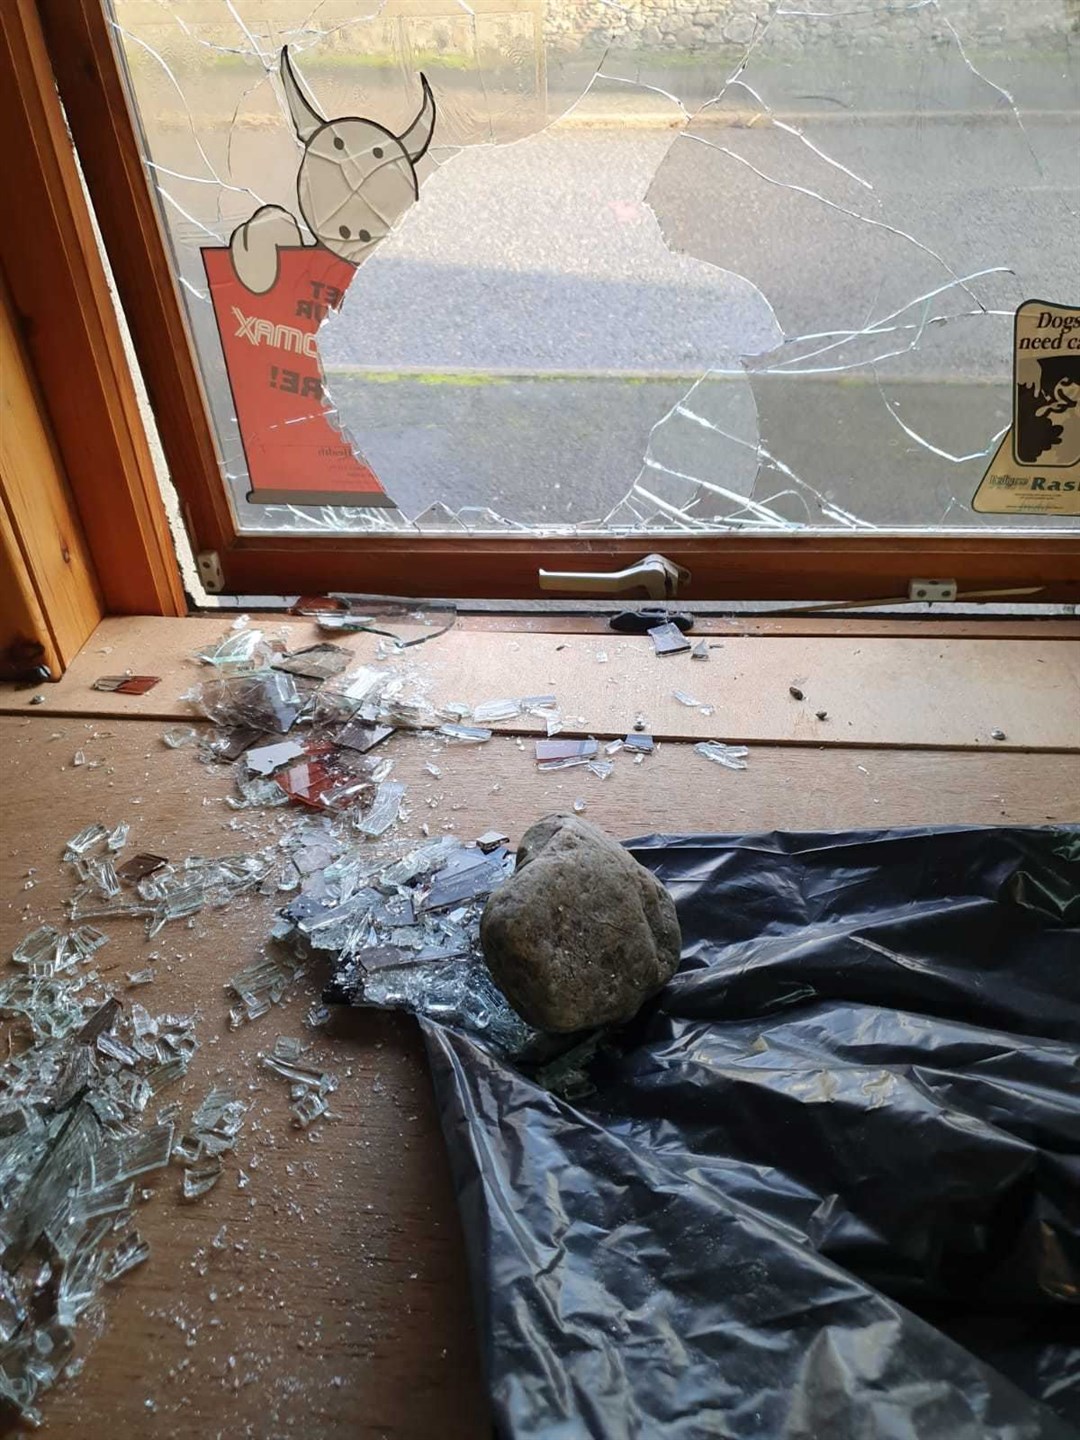 Easter Ross Vets posted this picture following the break-in.